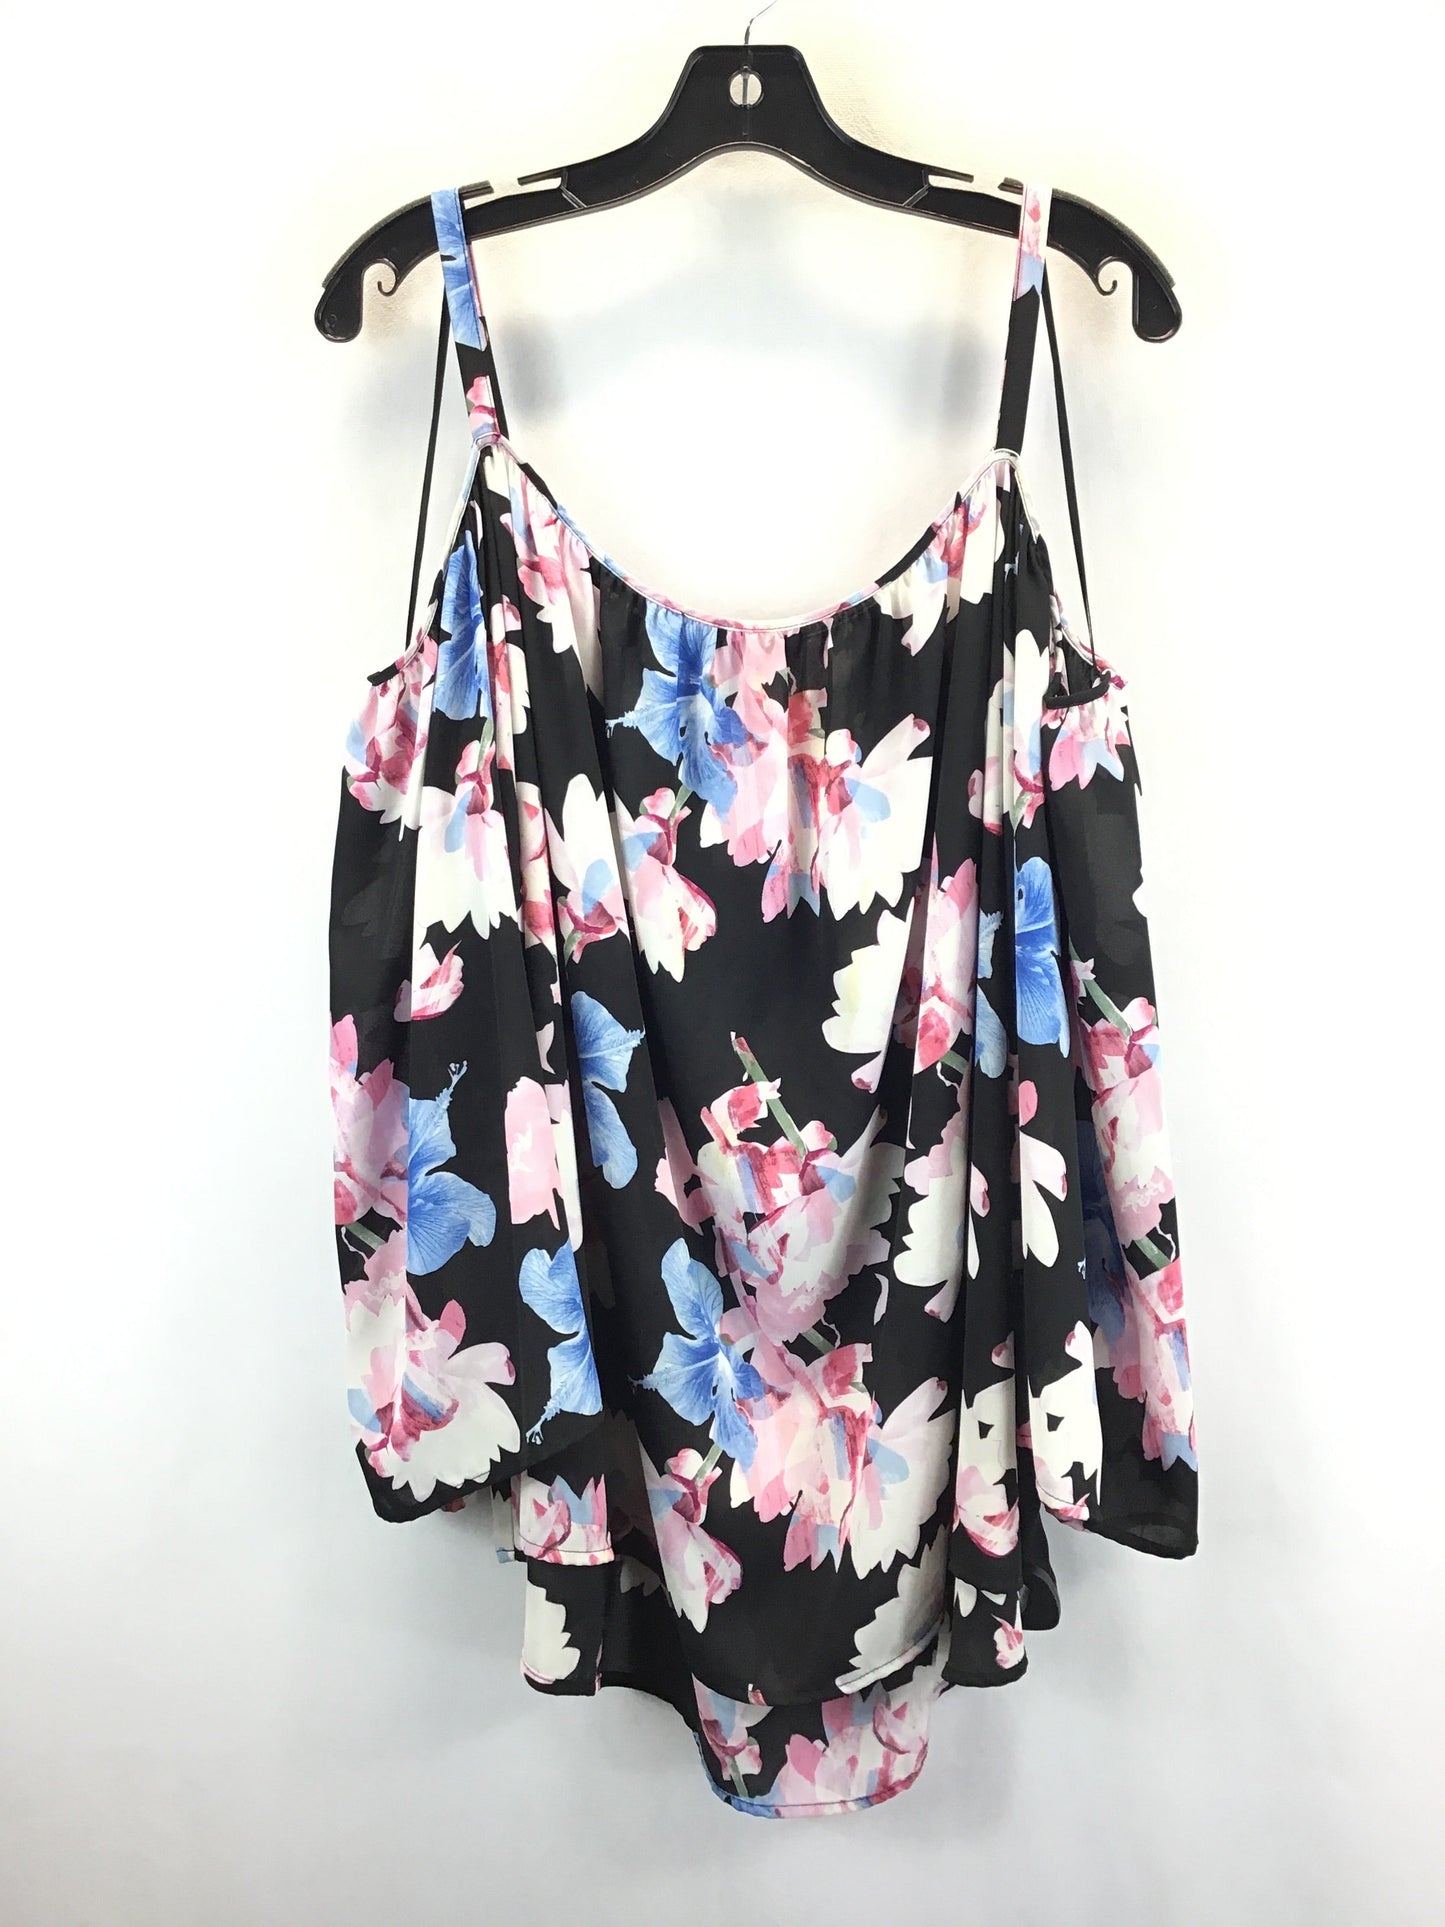 Floral Print Top 3/4 Sleeve Vince Camuto, Size 2x